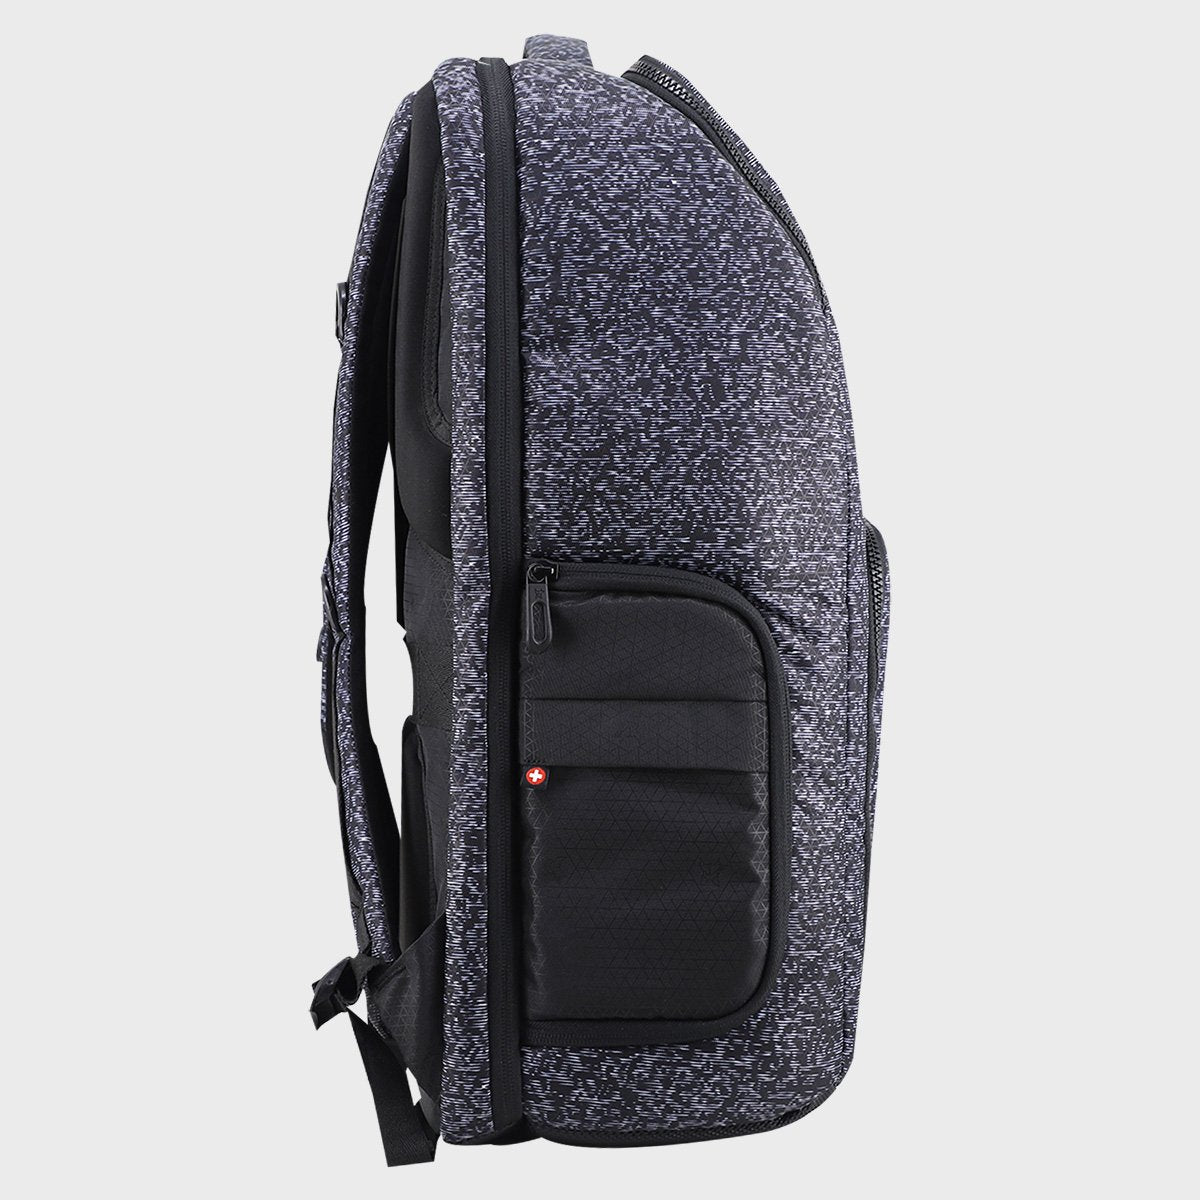 Arctic Fox Polaroid Jet Black Professional Dslr Camera Bag and Camera Backpack With Laptop Compartment